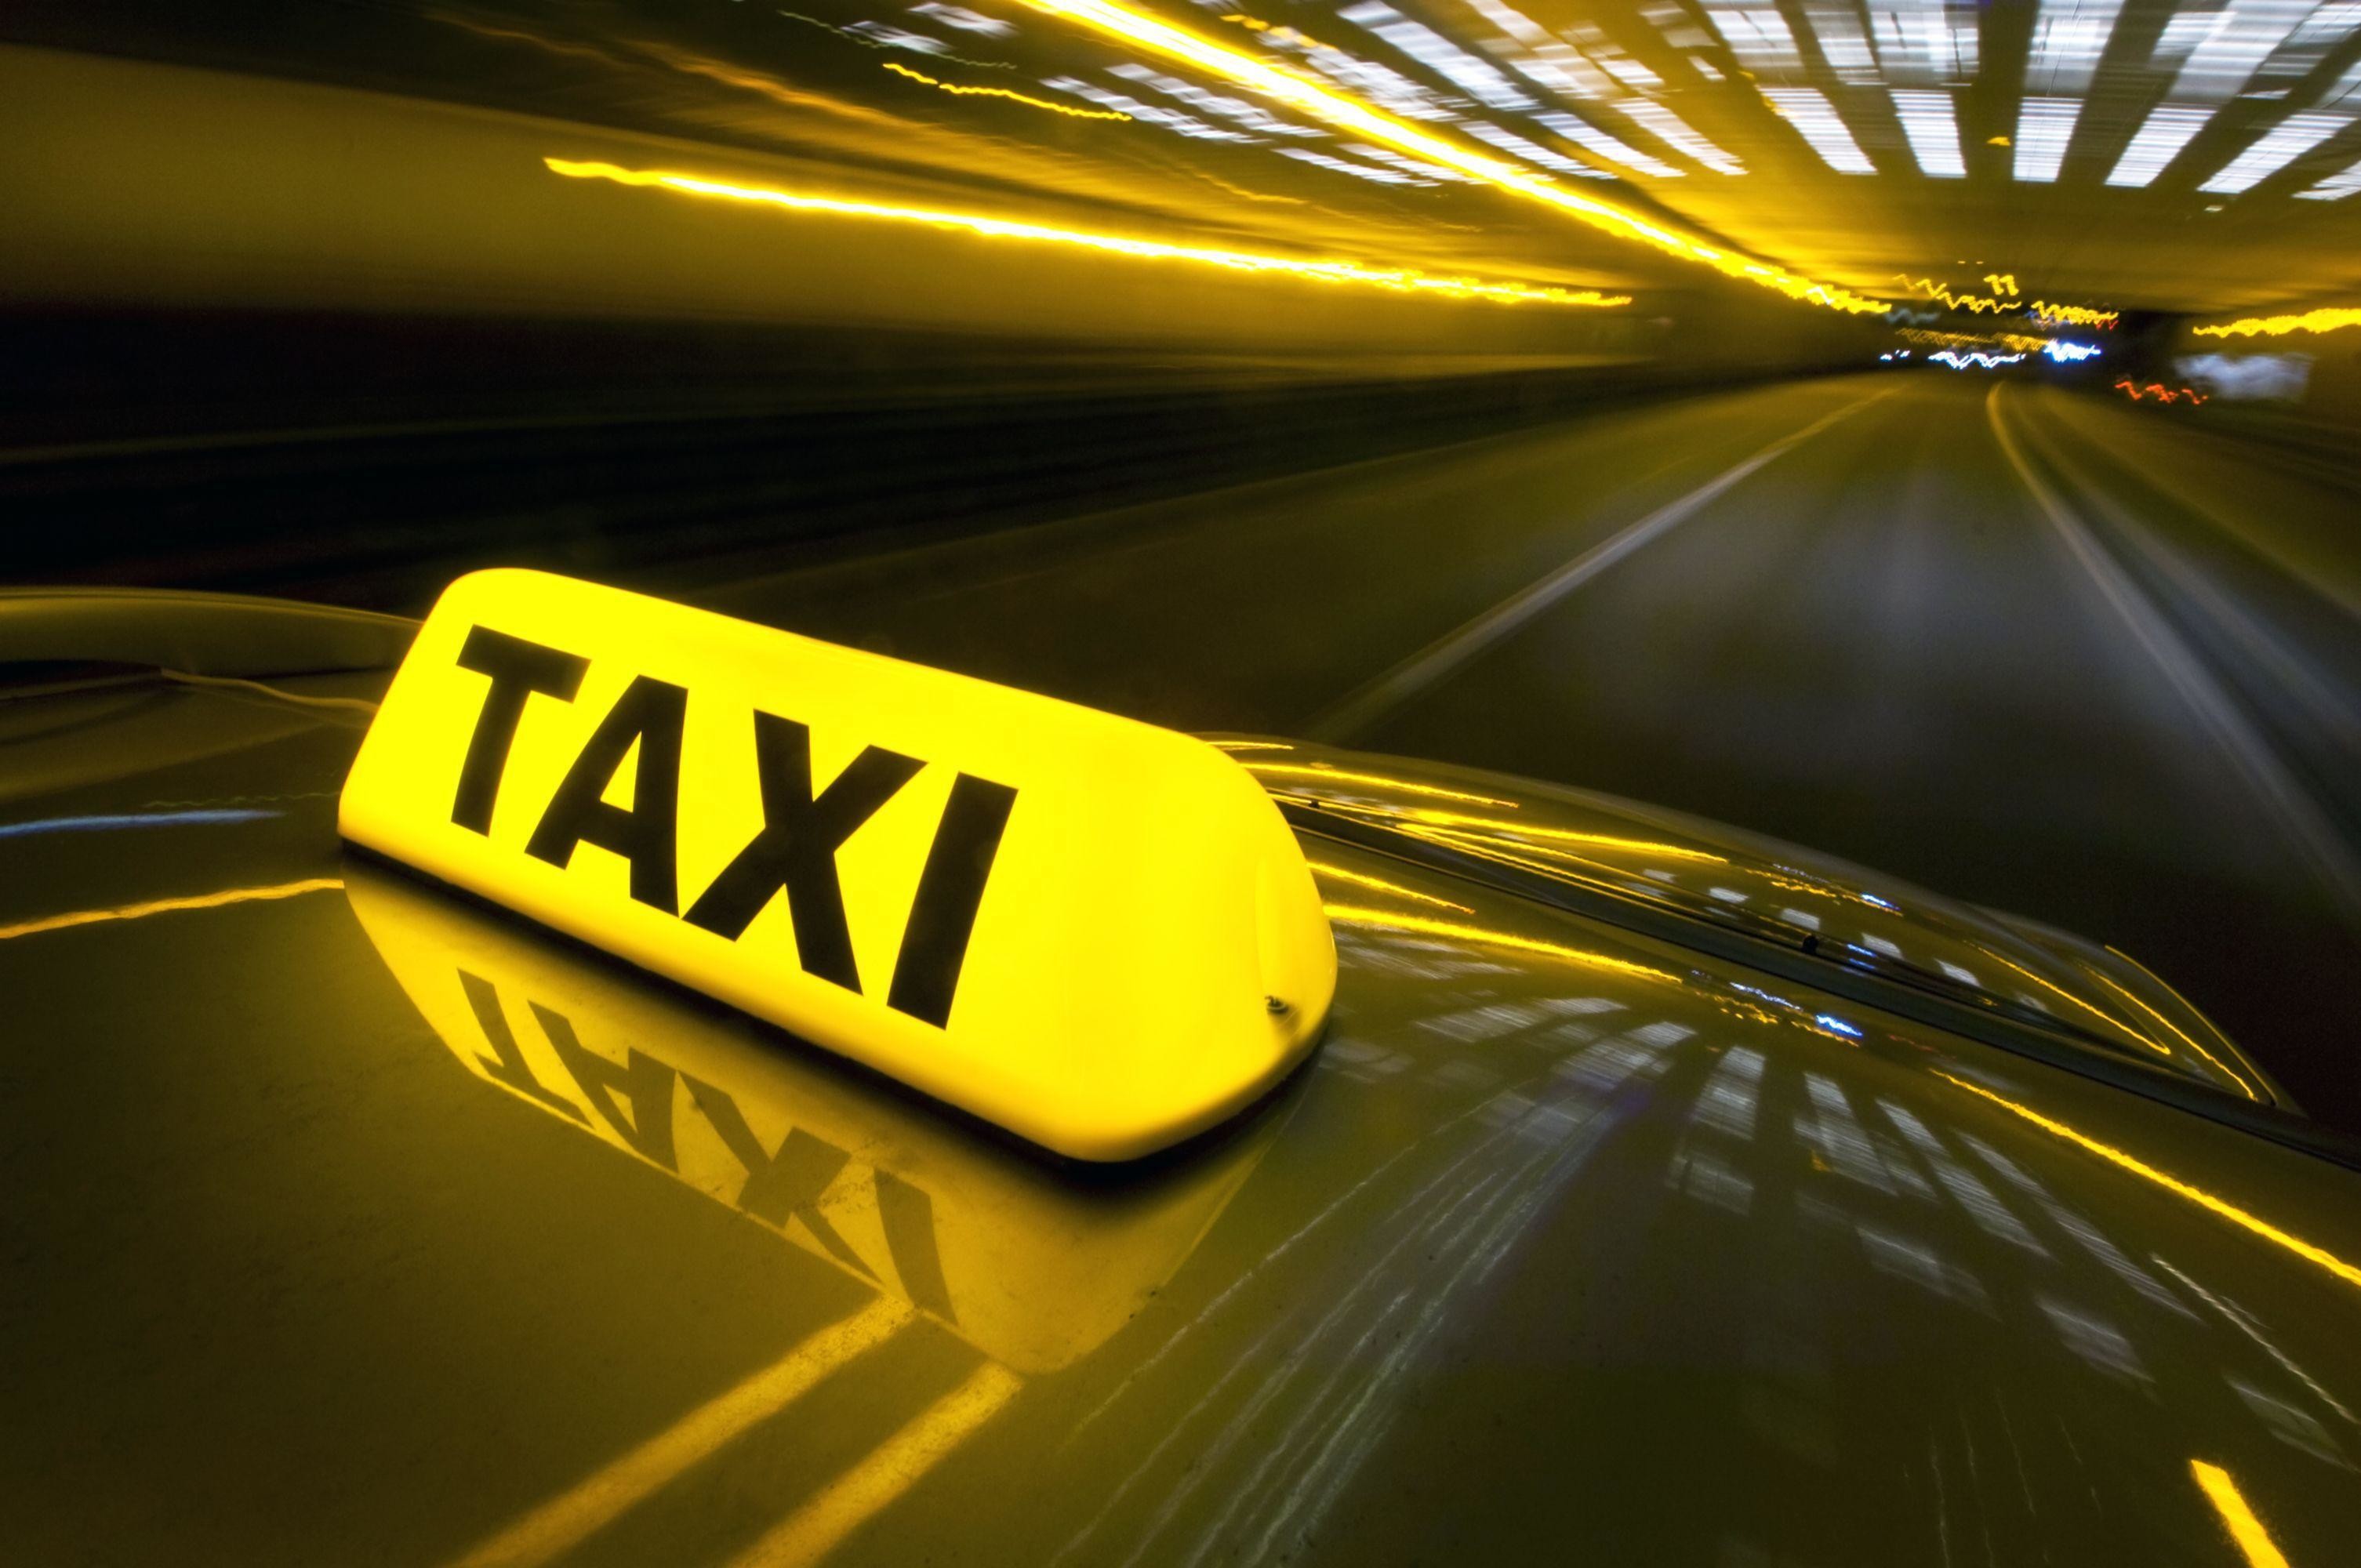 450+ Taxi Cab Pictures [HD] | Download Free Images on Unsplash